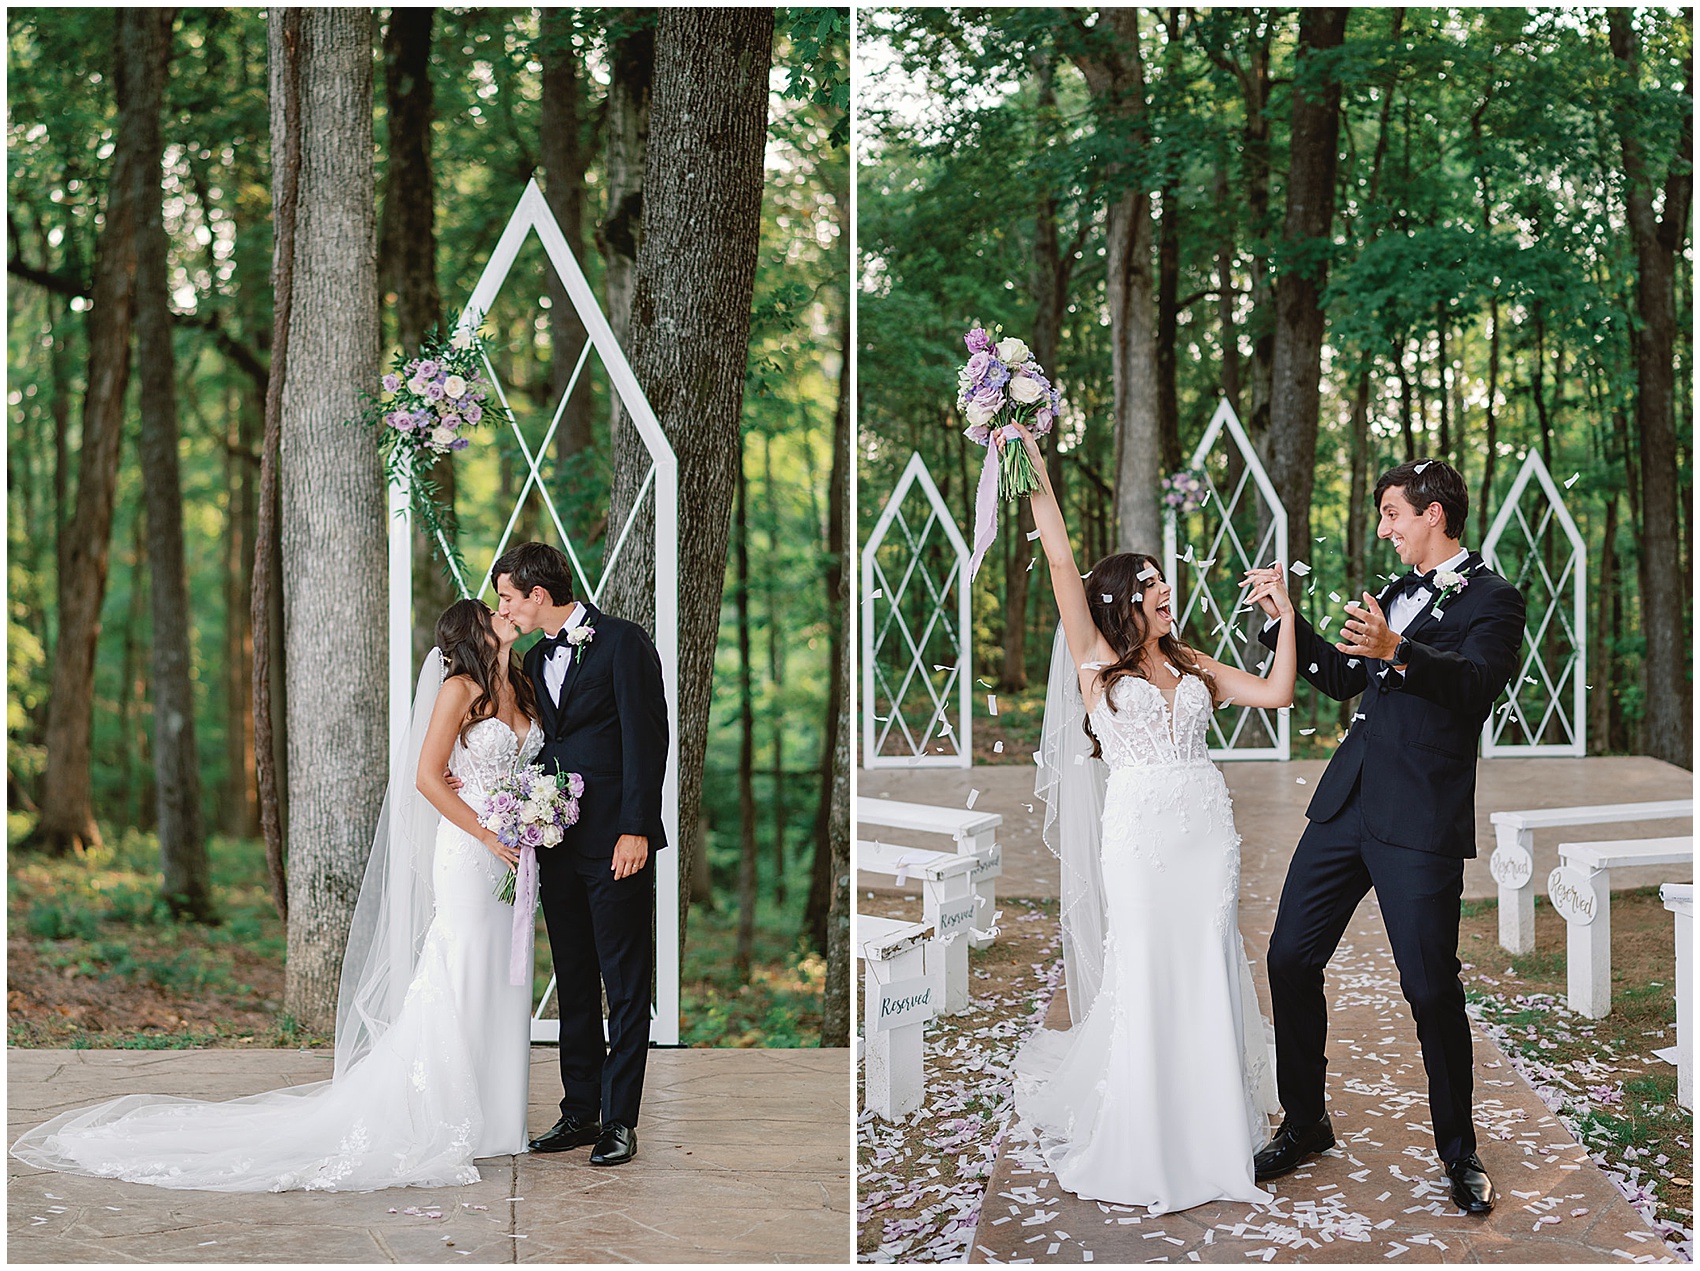 Newlyweds kiss and celebrate after their wedding ceremony with confetti in the forest